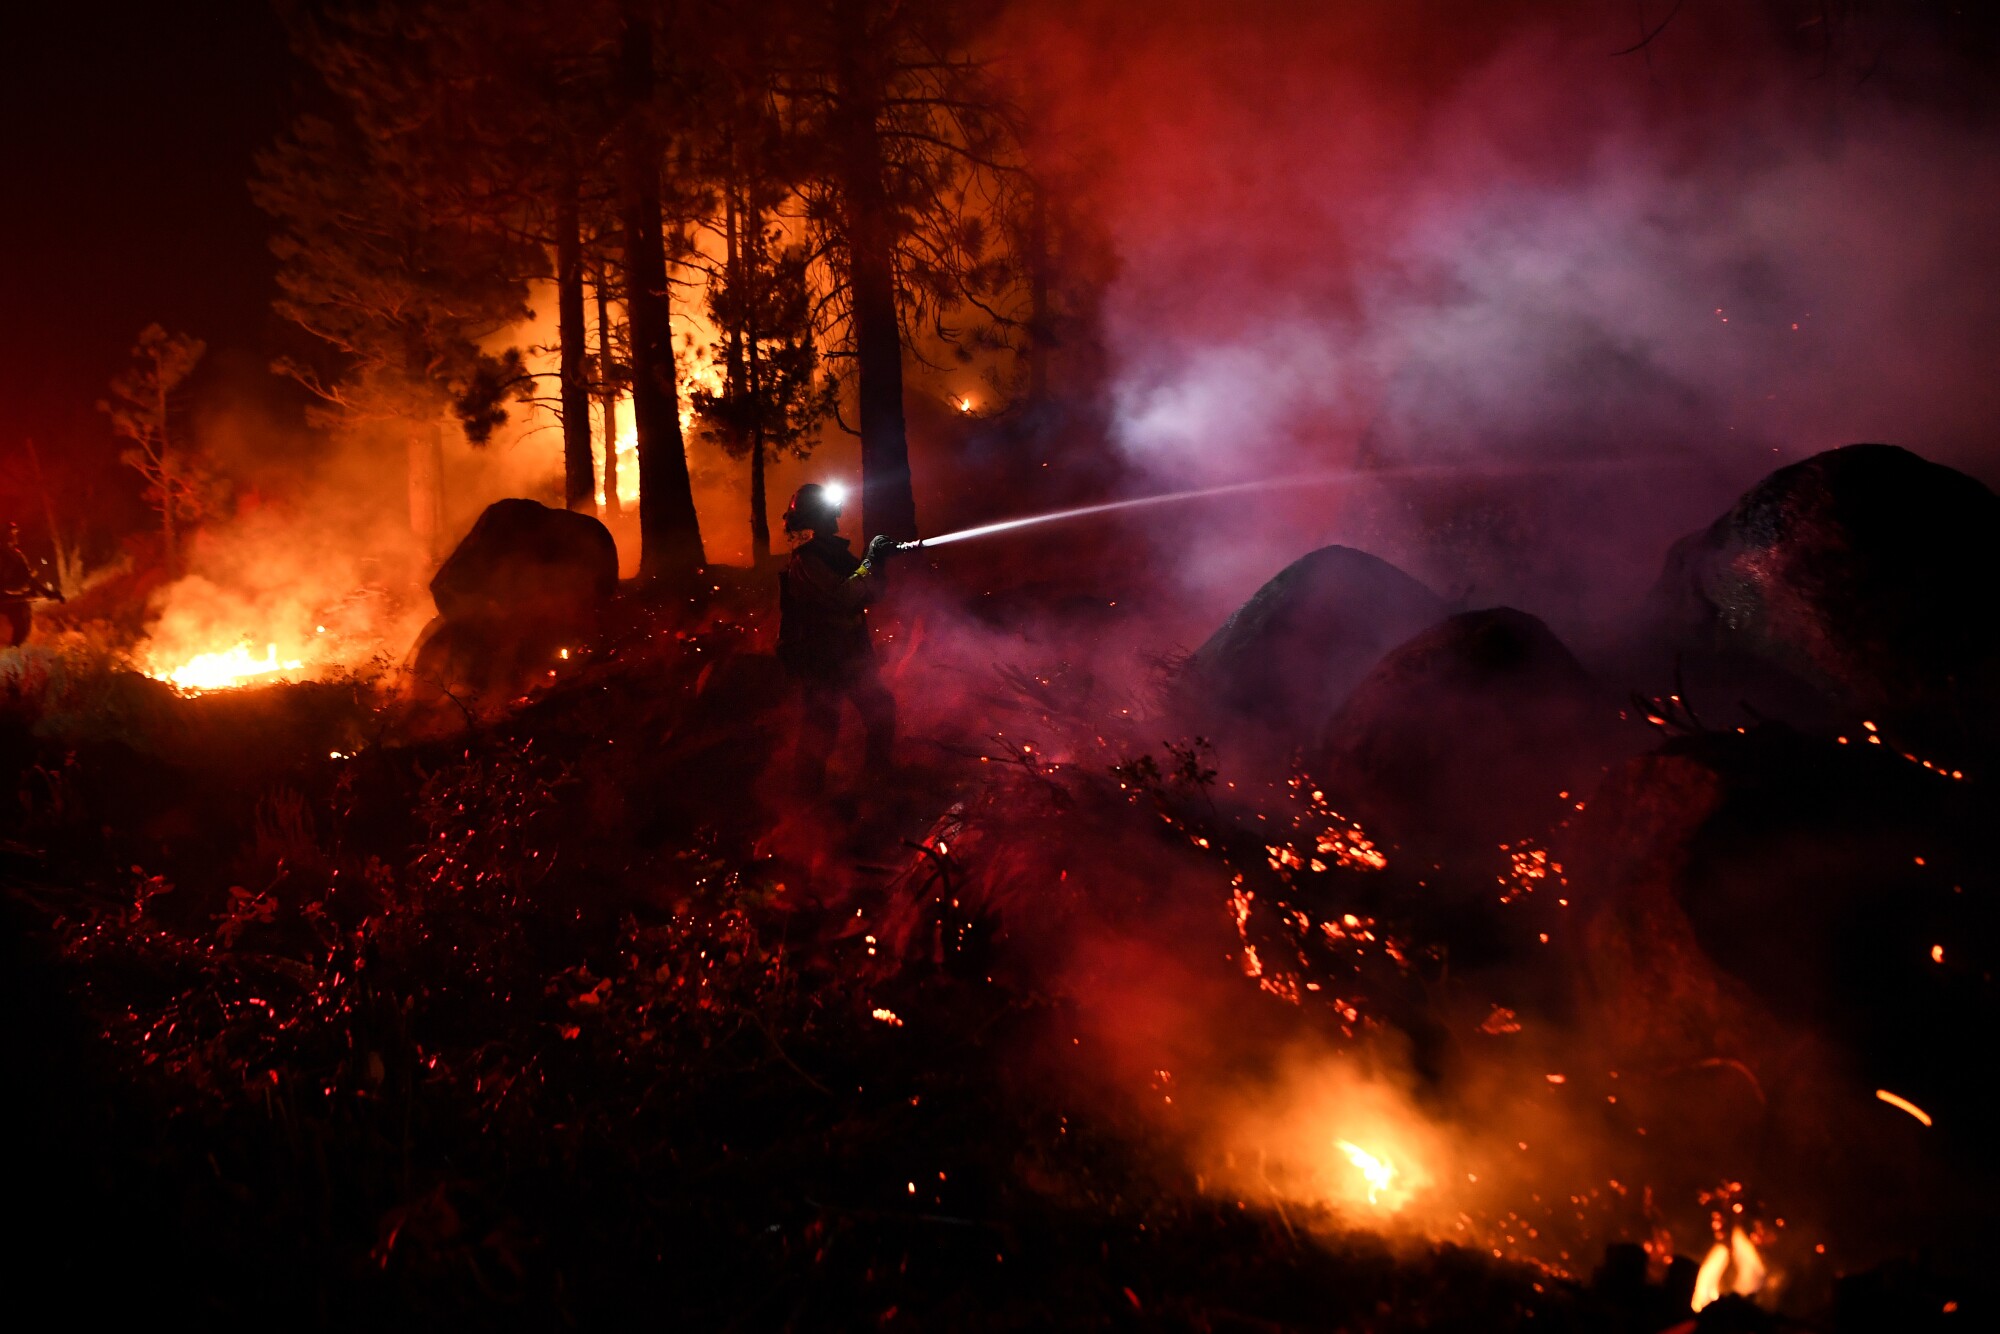 A firefighter sprays water onto a fire surrounded by smoke.